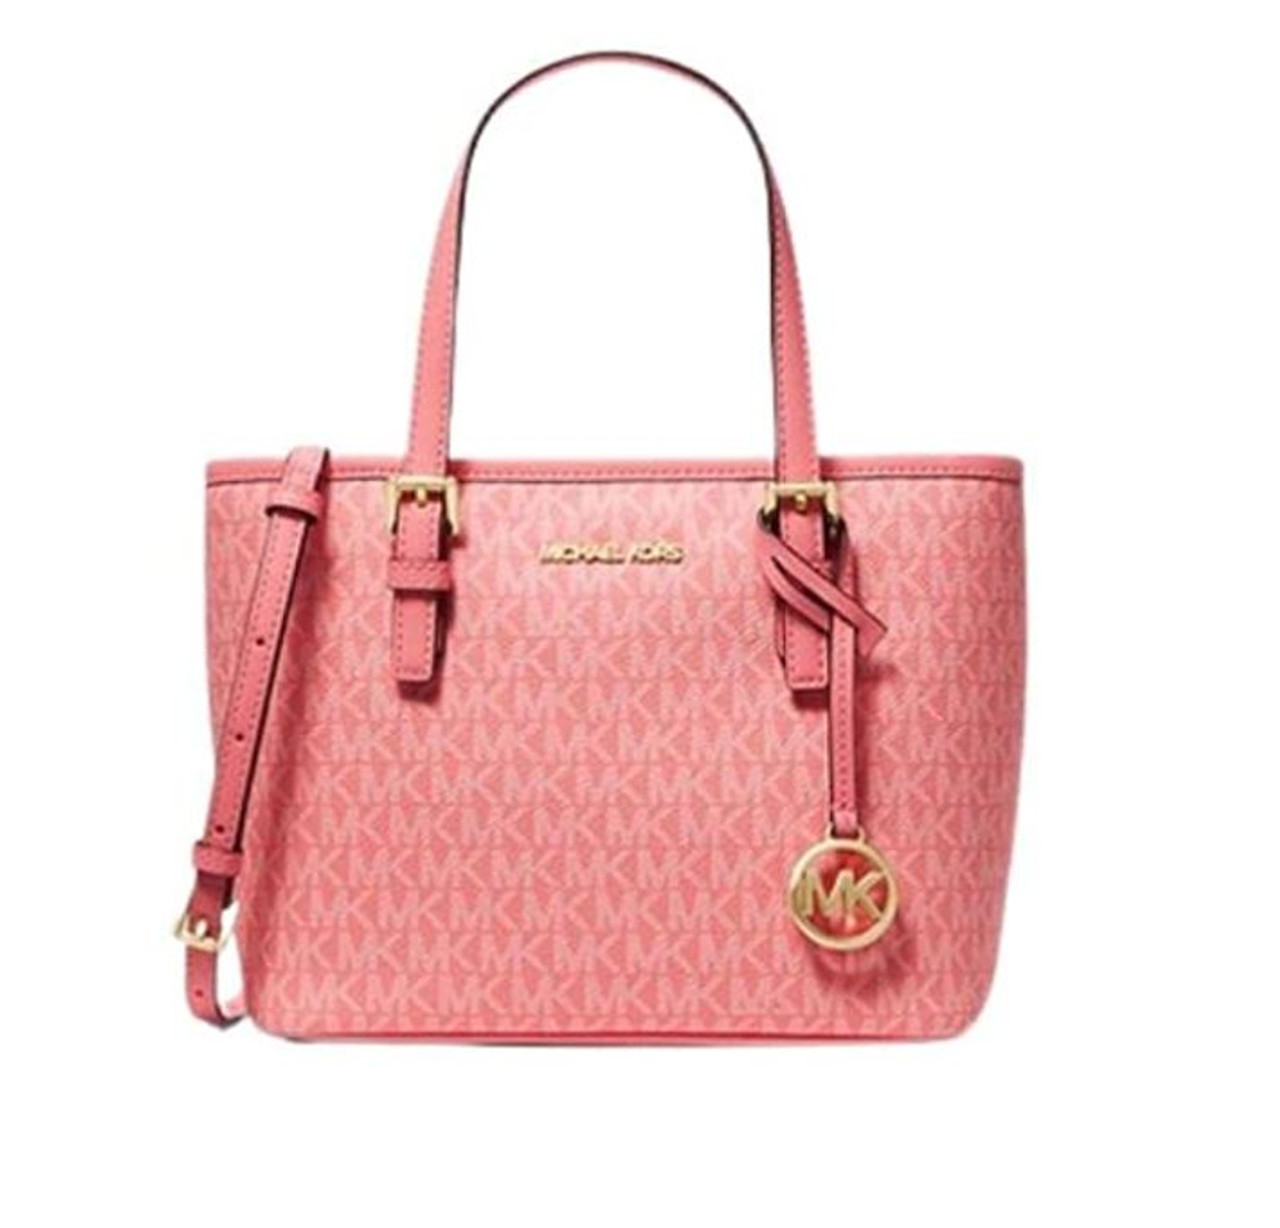 Michael Kors Extra Small Carry-all Tote